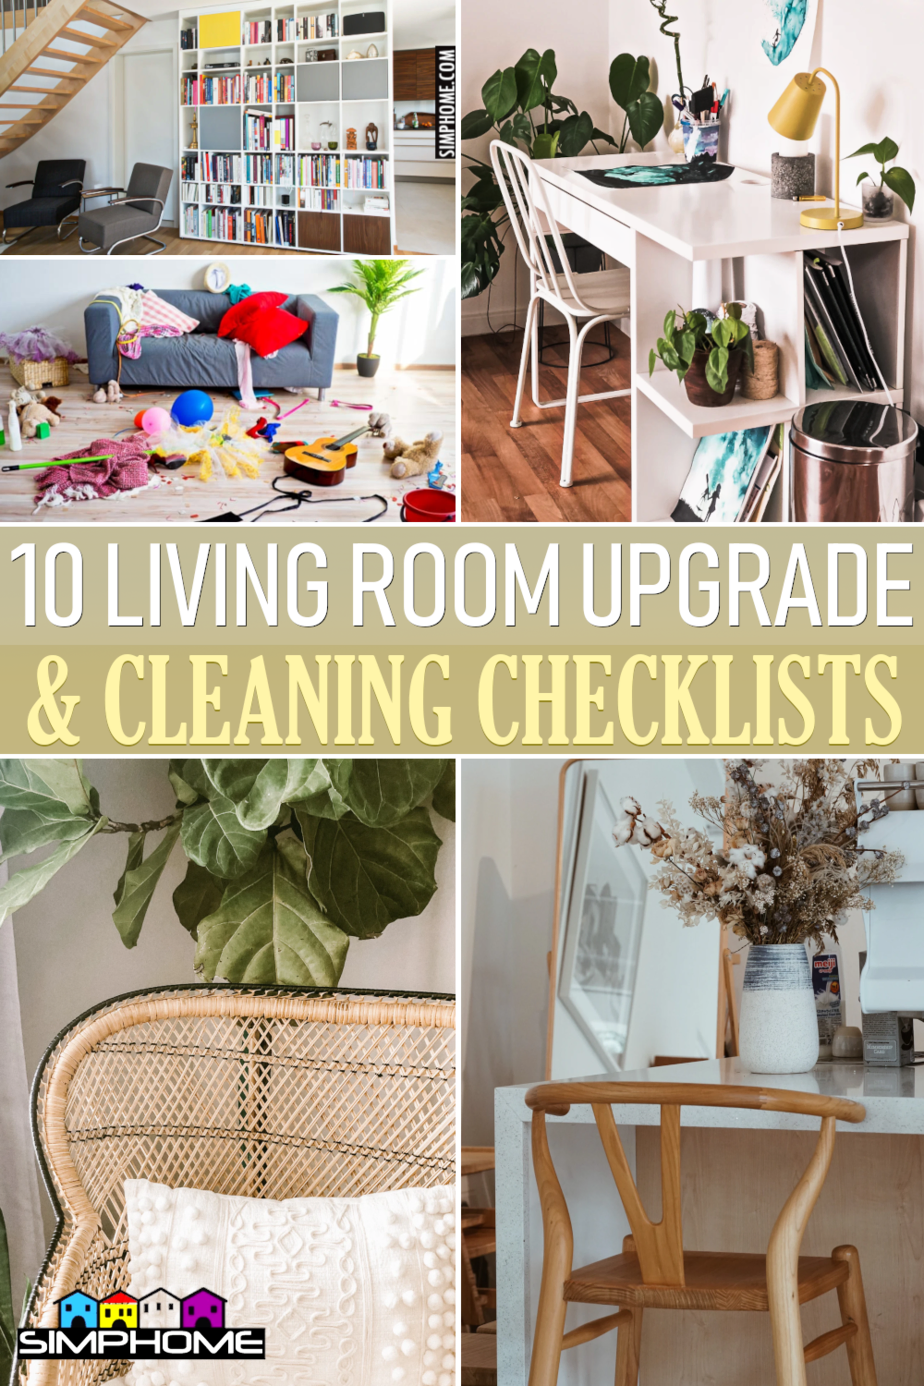 10 Living Room Checklists You Probably Have Missed via SimphomecomFEATURED